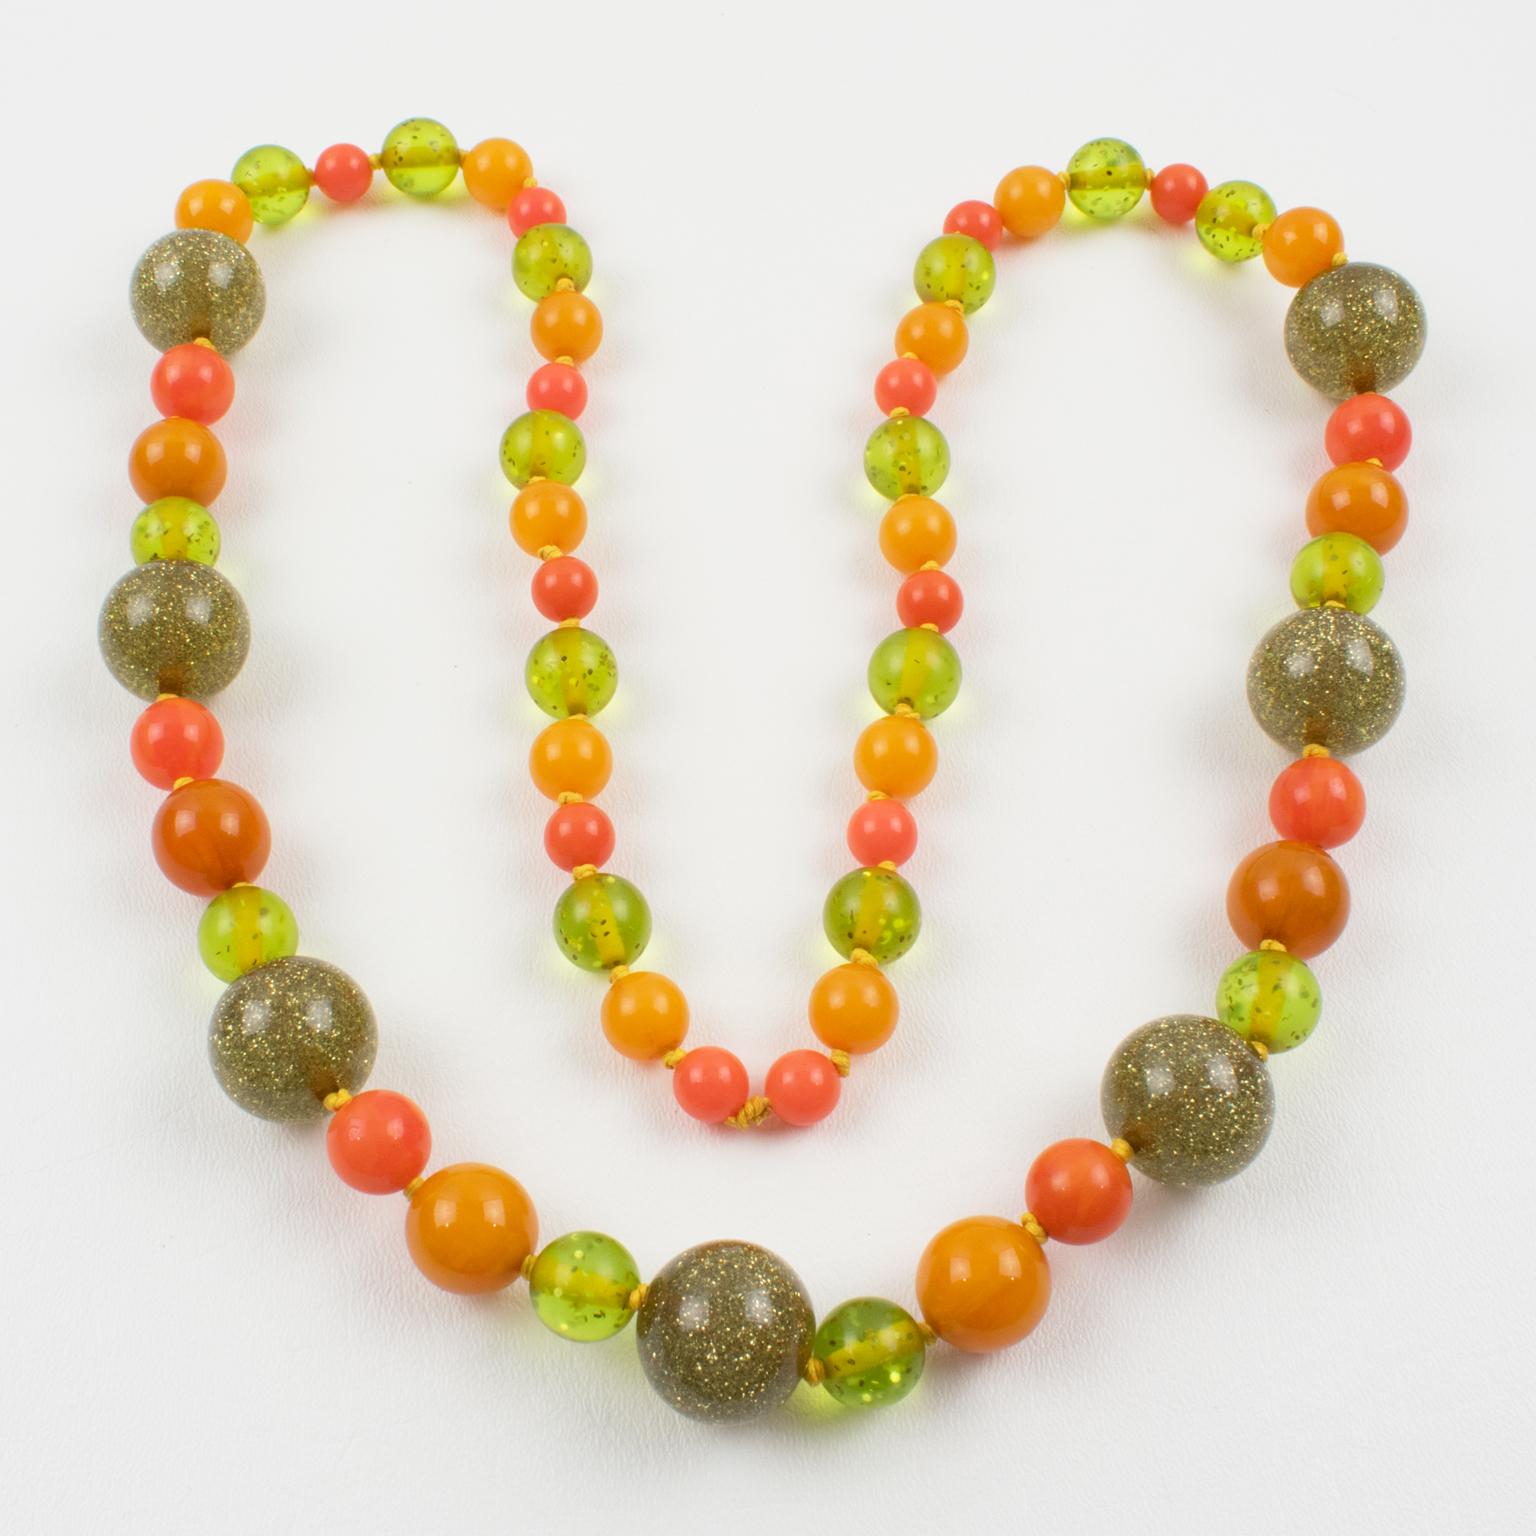 Women's or Men's Bakelite and Lucite Extra Long Necklace with Orange, Green and Glitter Beads For Sale